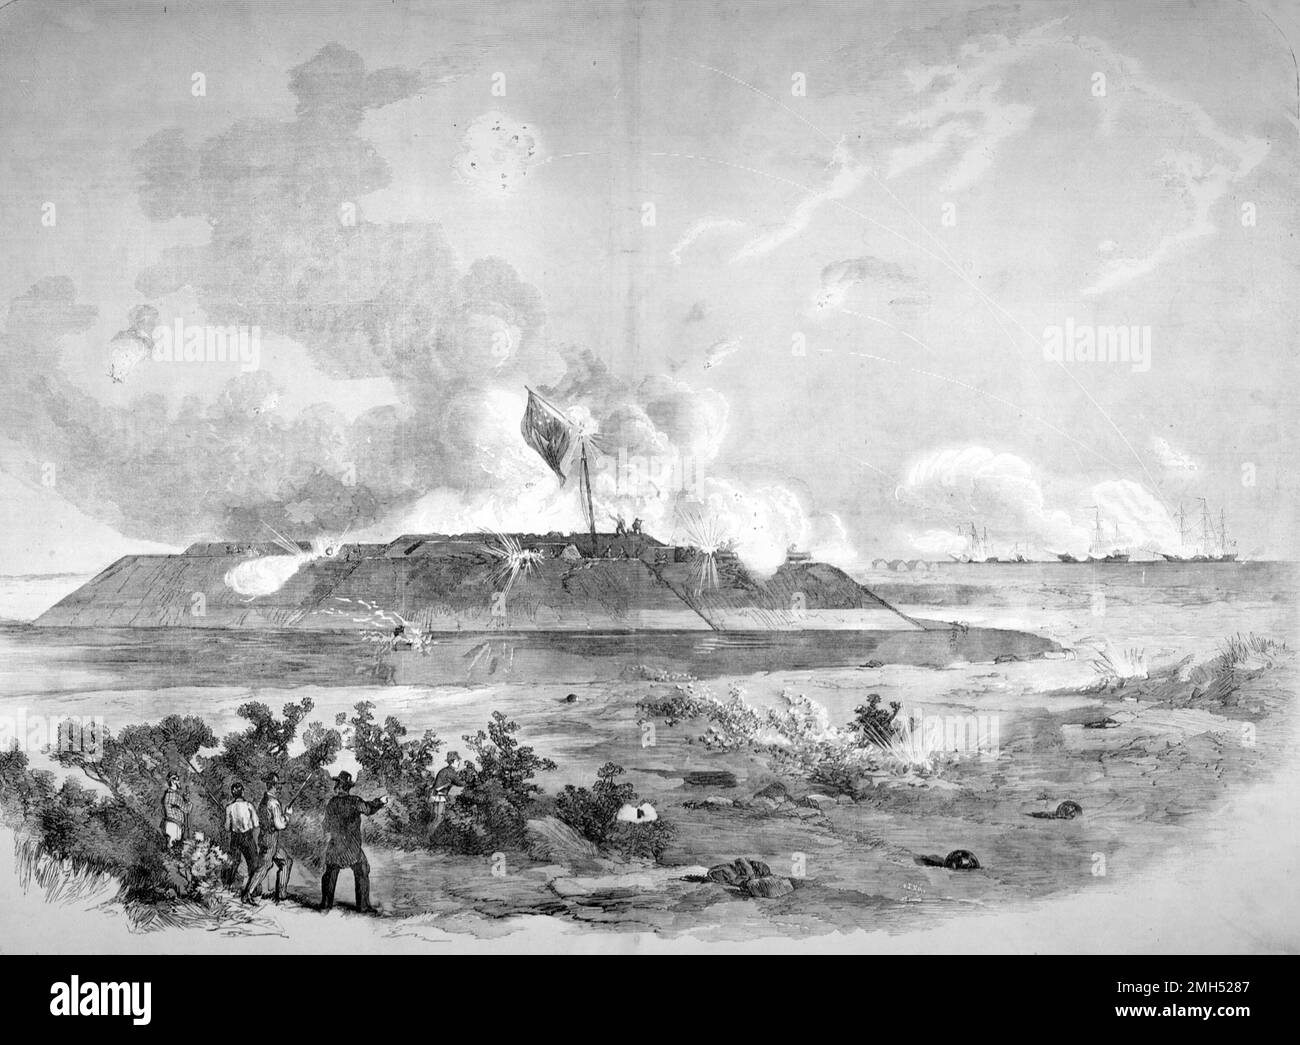 The Battle of Hatteras Inlet Batteries was a combined operation of the Union Army and Navy that took place in North Carolina on 28-29th August 1861. It was won by the Unionist forces who captured the forts at Cape Hatteras. Stock Photo